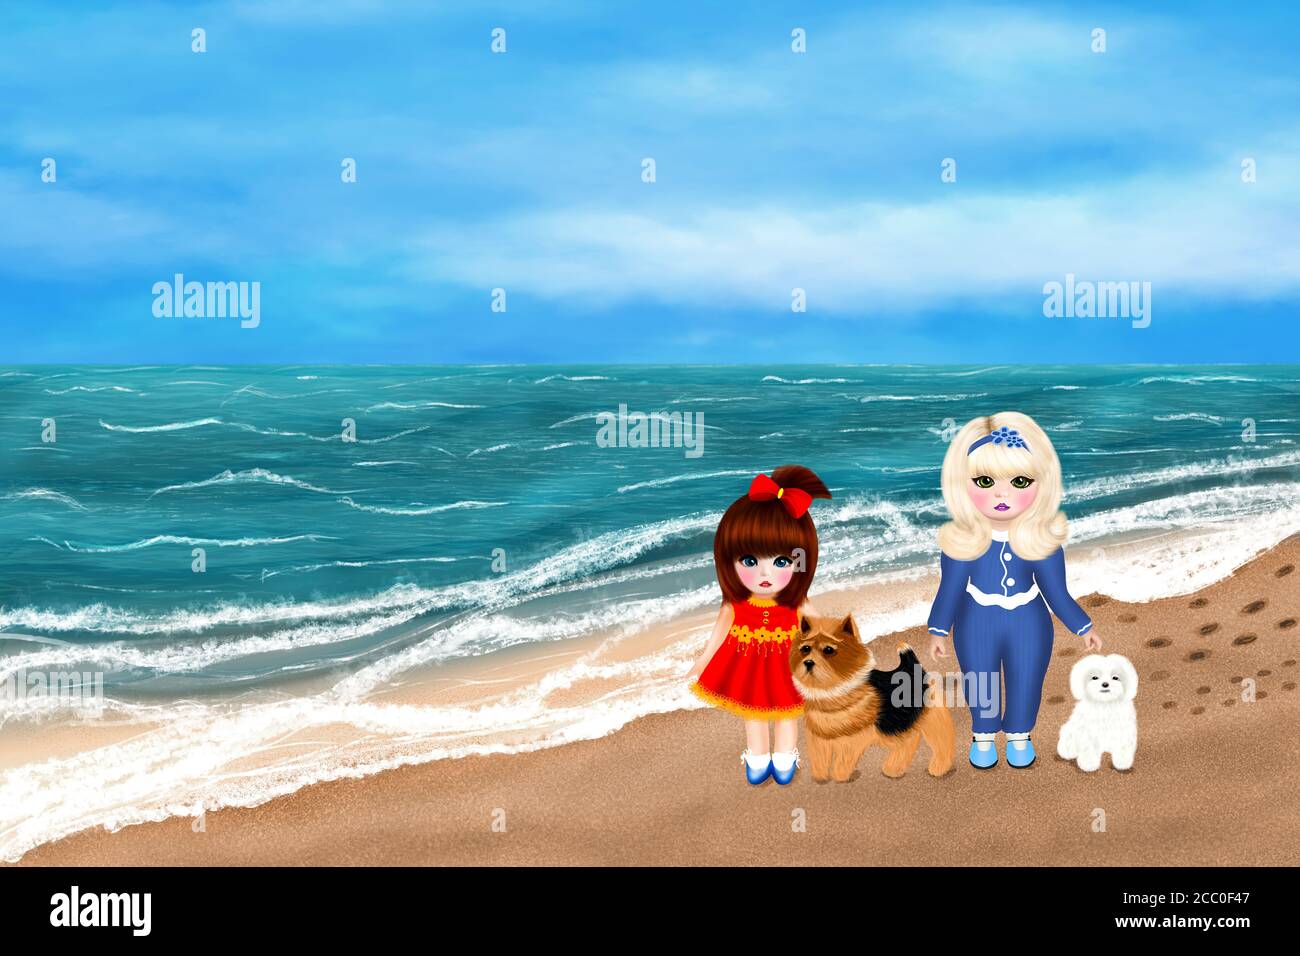 Two cute girls with two dogs walks along the beach. Girl in red dress and girl in blue suit with dogs. Picture in kawaii dolls style. Digital artwork. Stock Photo